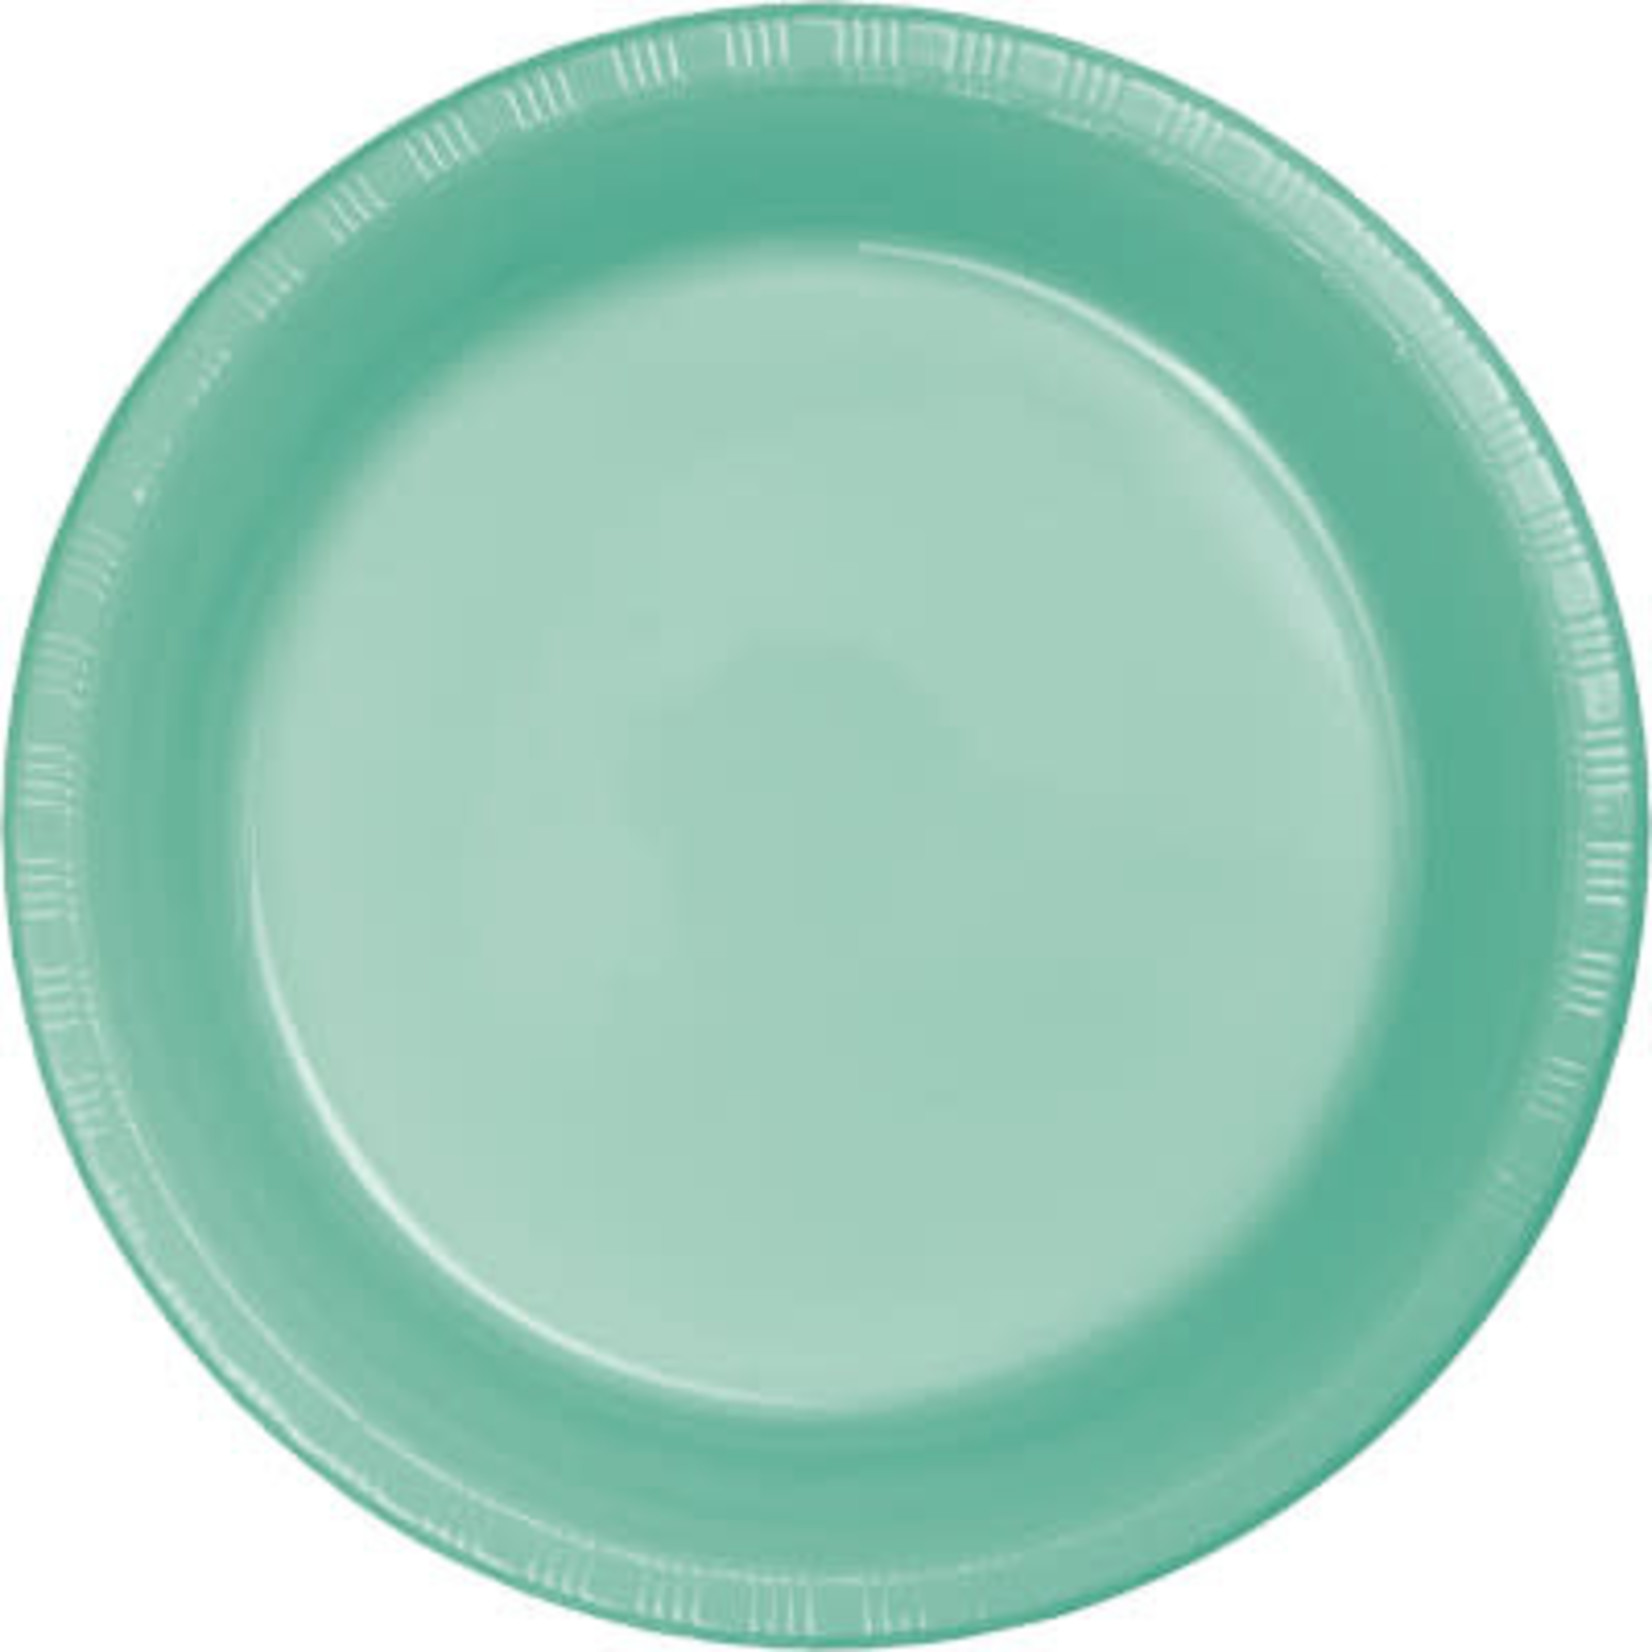 Touch of Color 10" Mint Green Plastic Banquet Plates - 20ct.